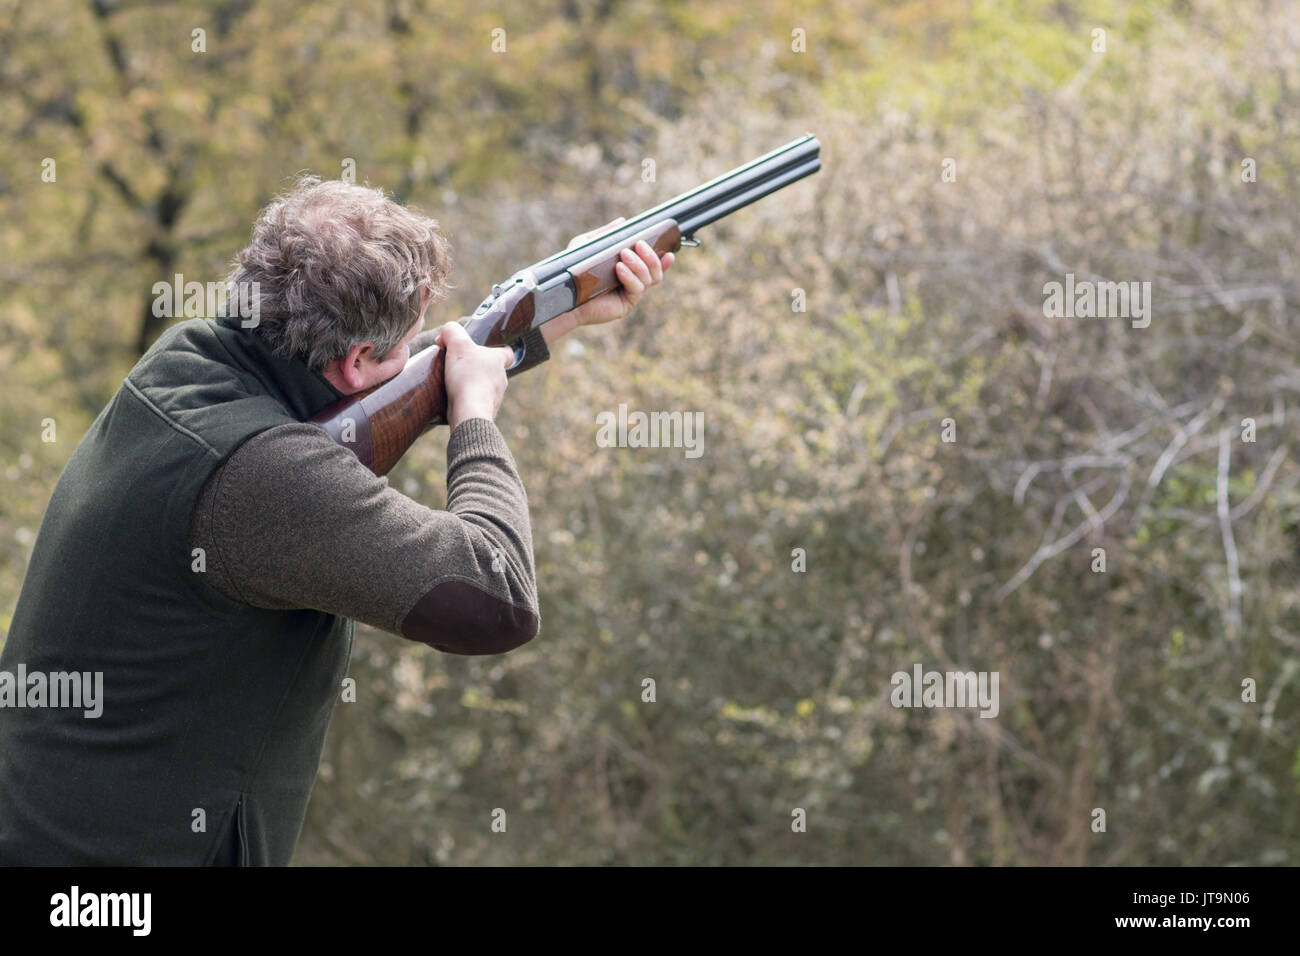 Hunter in forest during hunting season aiming before shoot Stock Photo